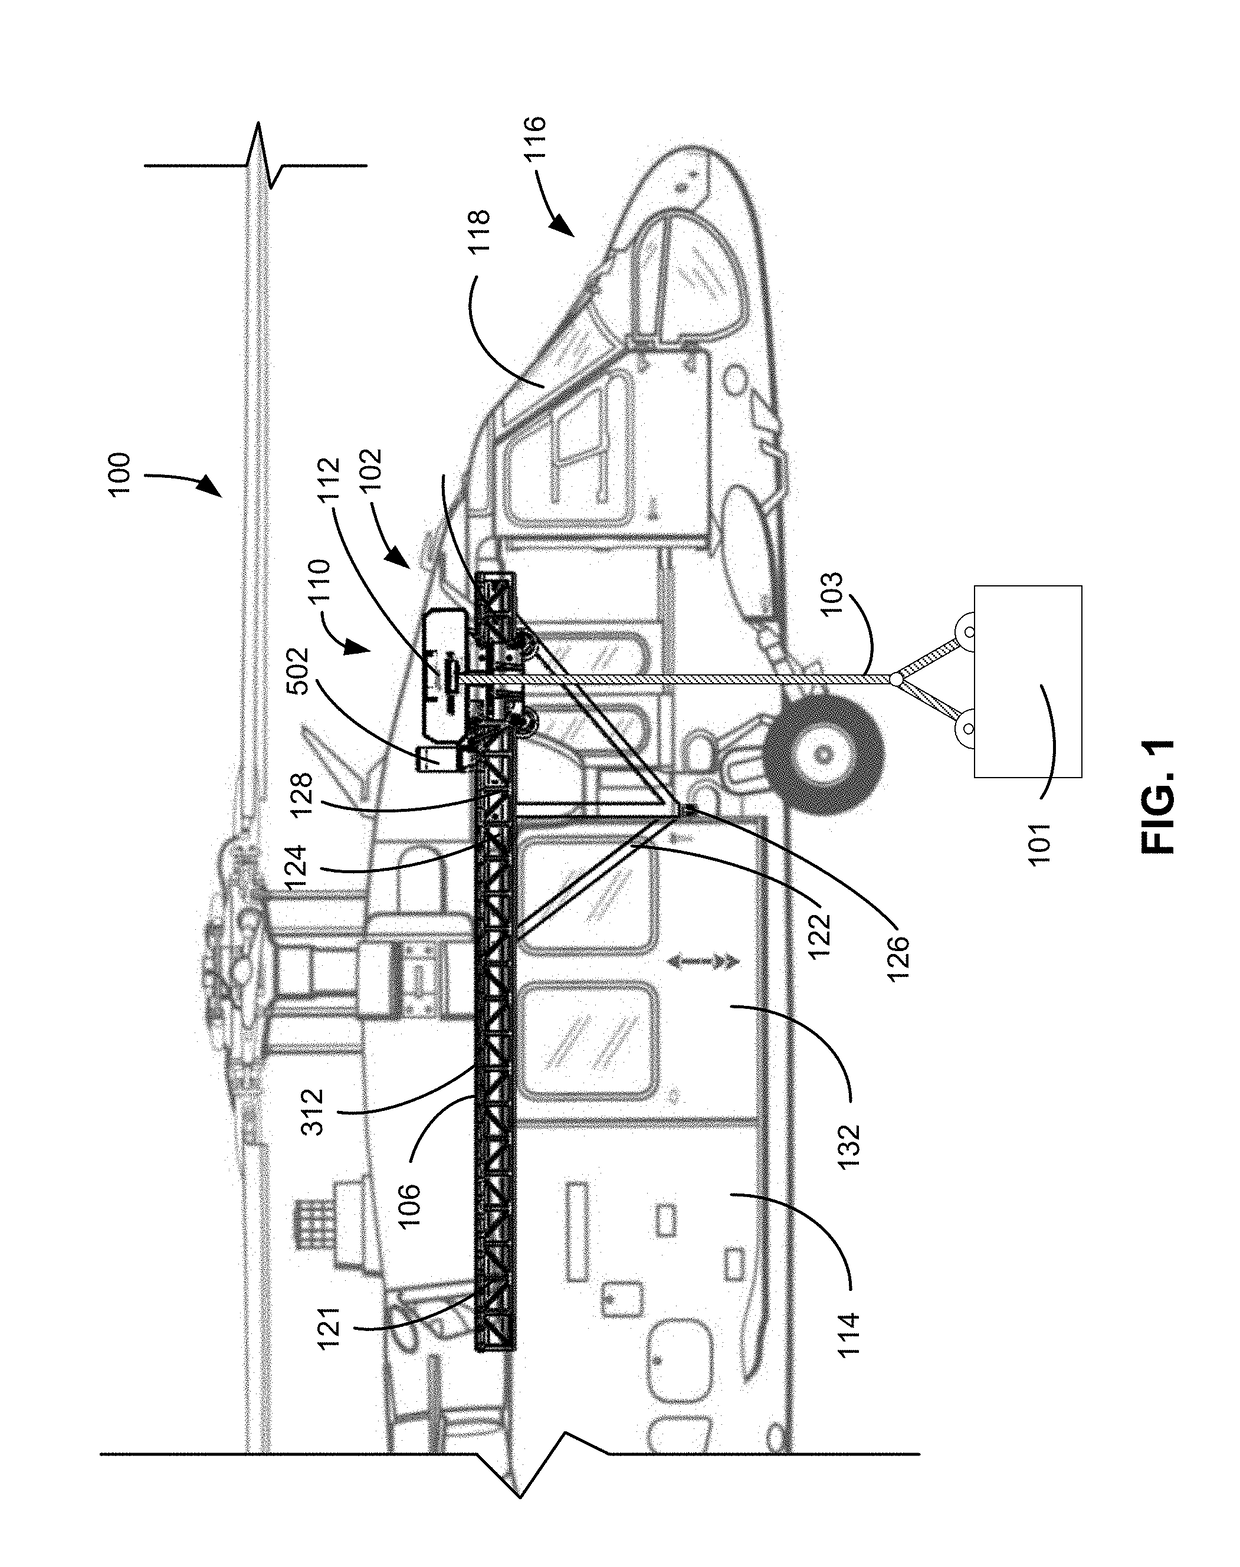 Systems and methods for slung load stabilization